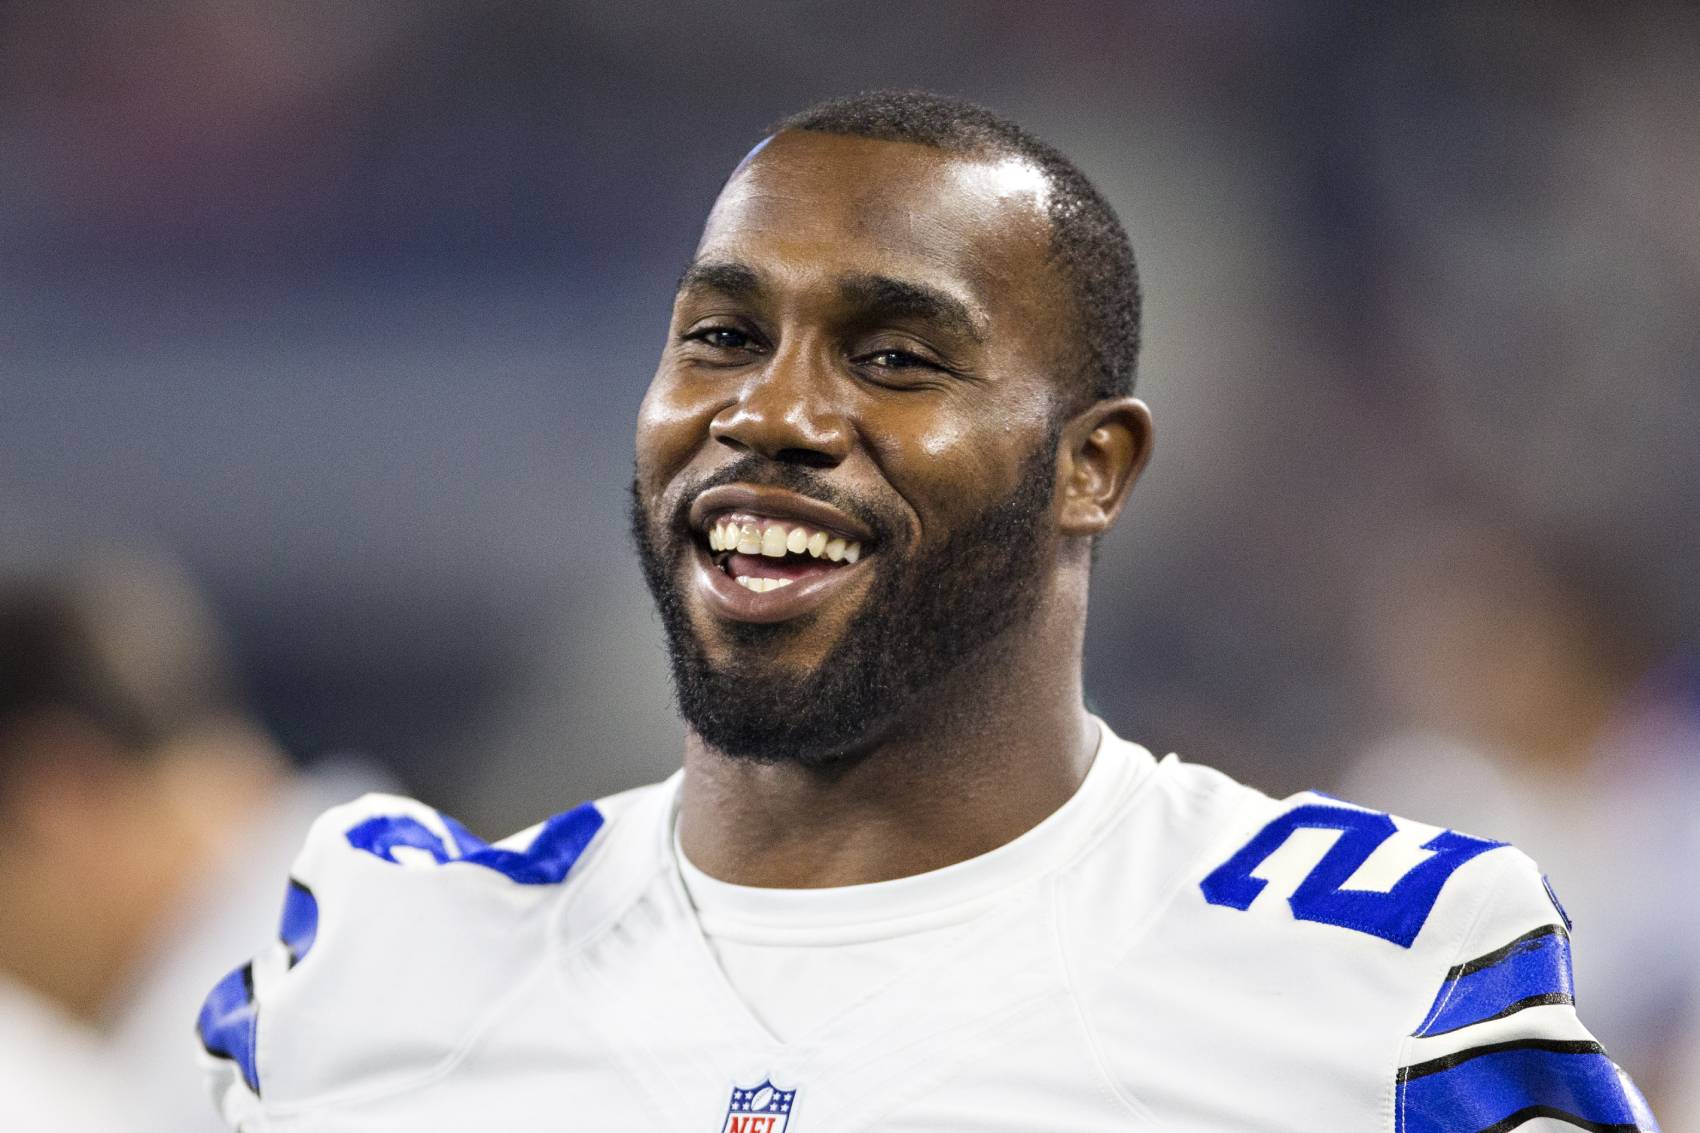 Darren McFadden revived his career with a breakout season for the Dallas Cowboys in 2015.